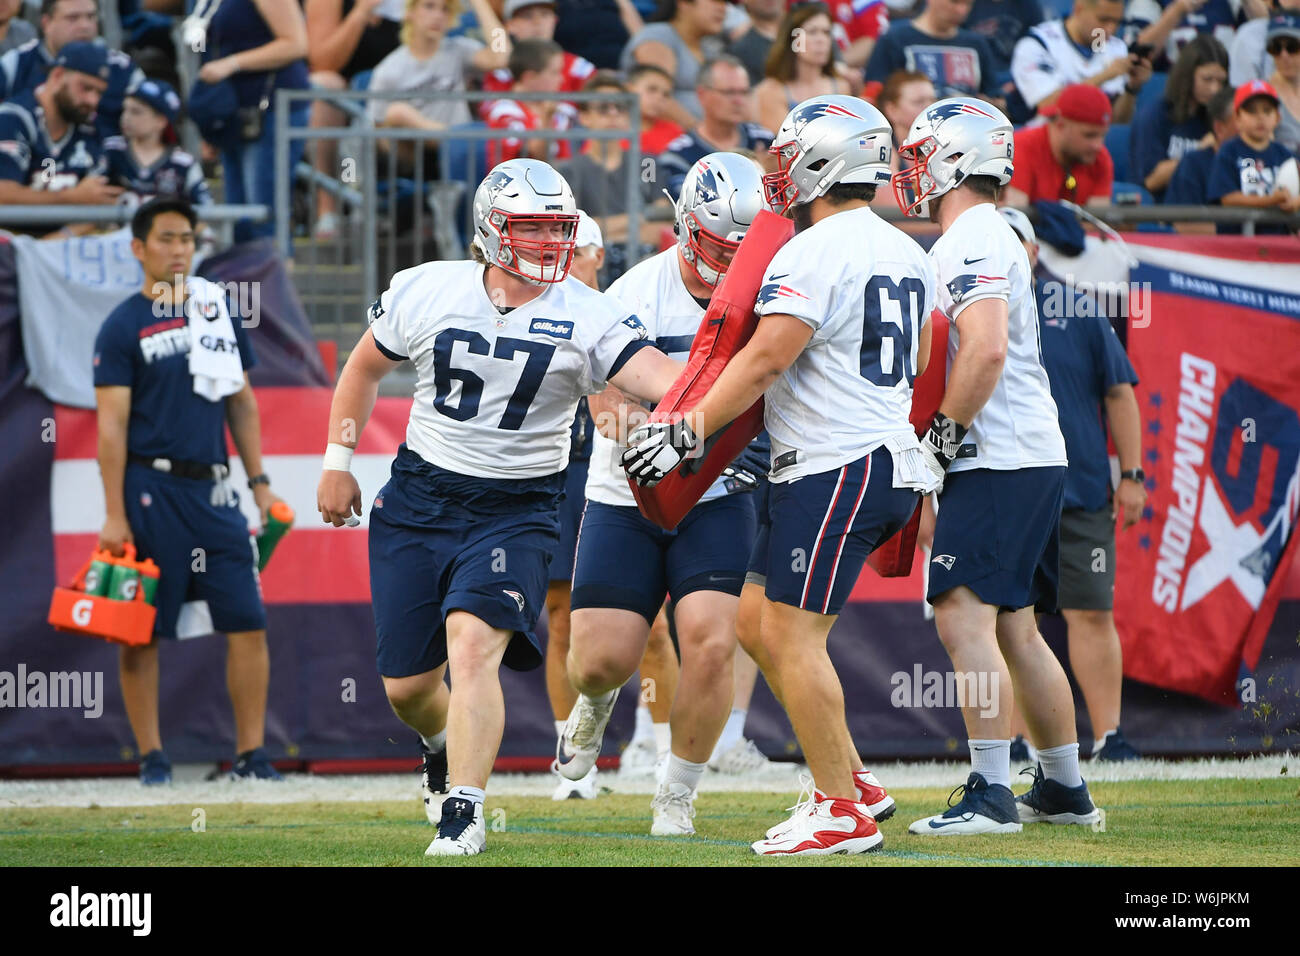 Foxborough, Massachusetts, USA. 29th July, 2019. New England Patriots offensive lineman Tyler Gauthier (67) and center David Andrews (60) at the New England Patriots training camp held at Gillette Stadium, in Foxborough, Massachusetts. Eric Canha/CSM/Alamy Live News Stock Photo